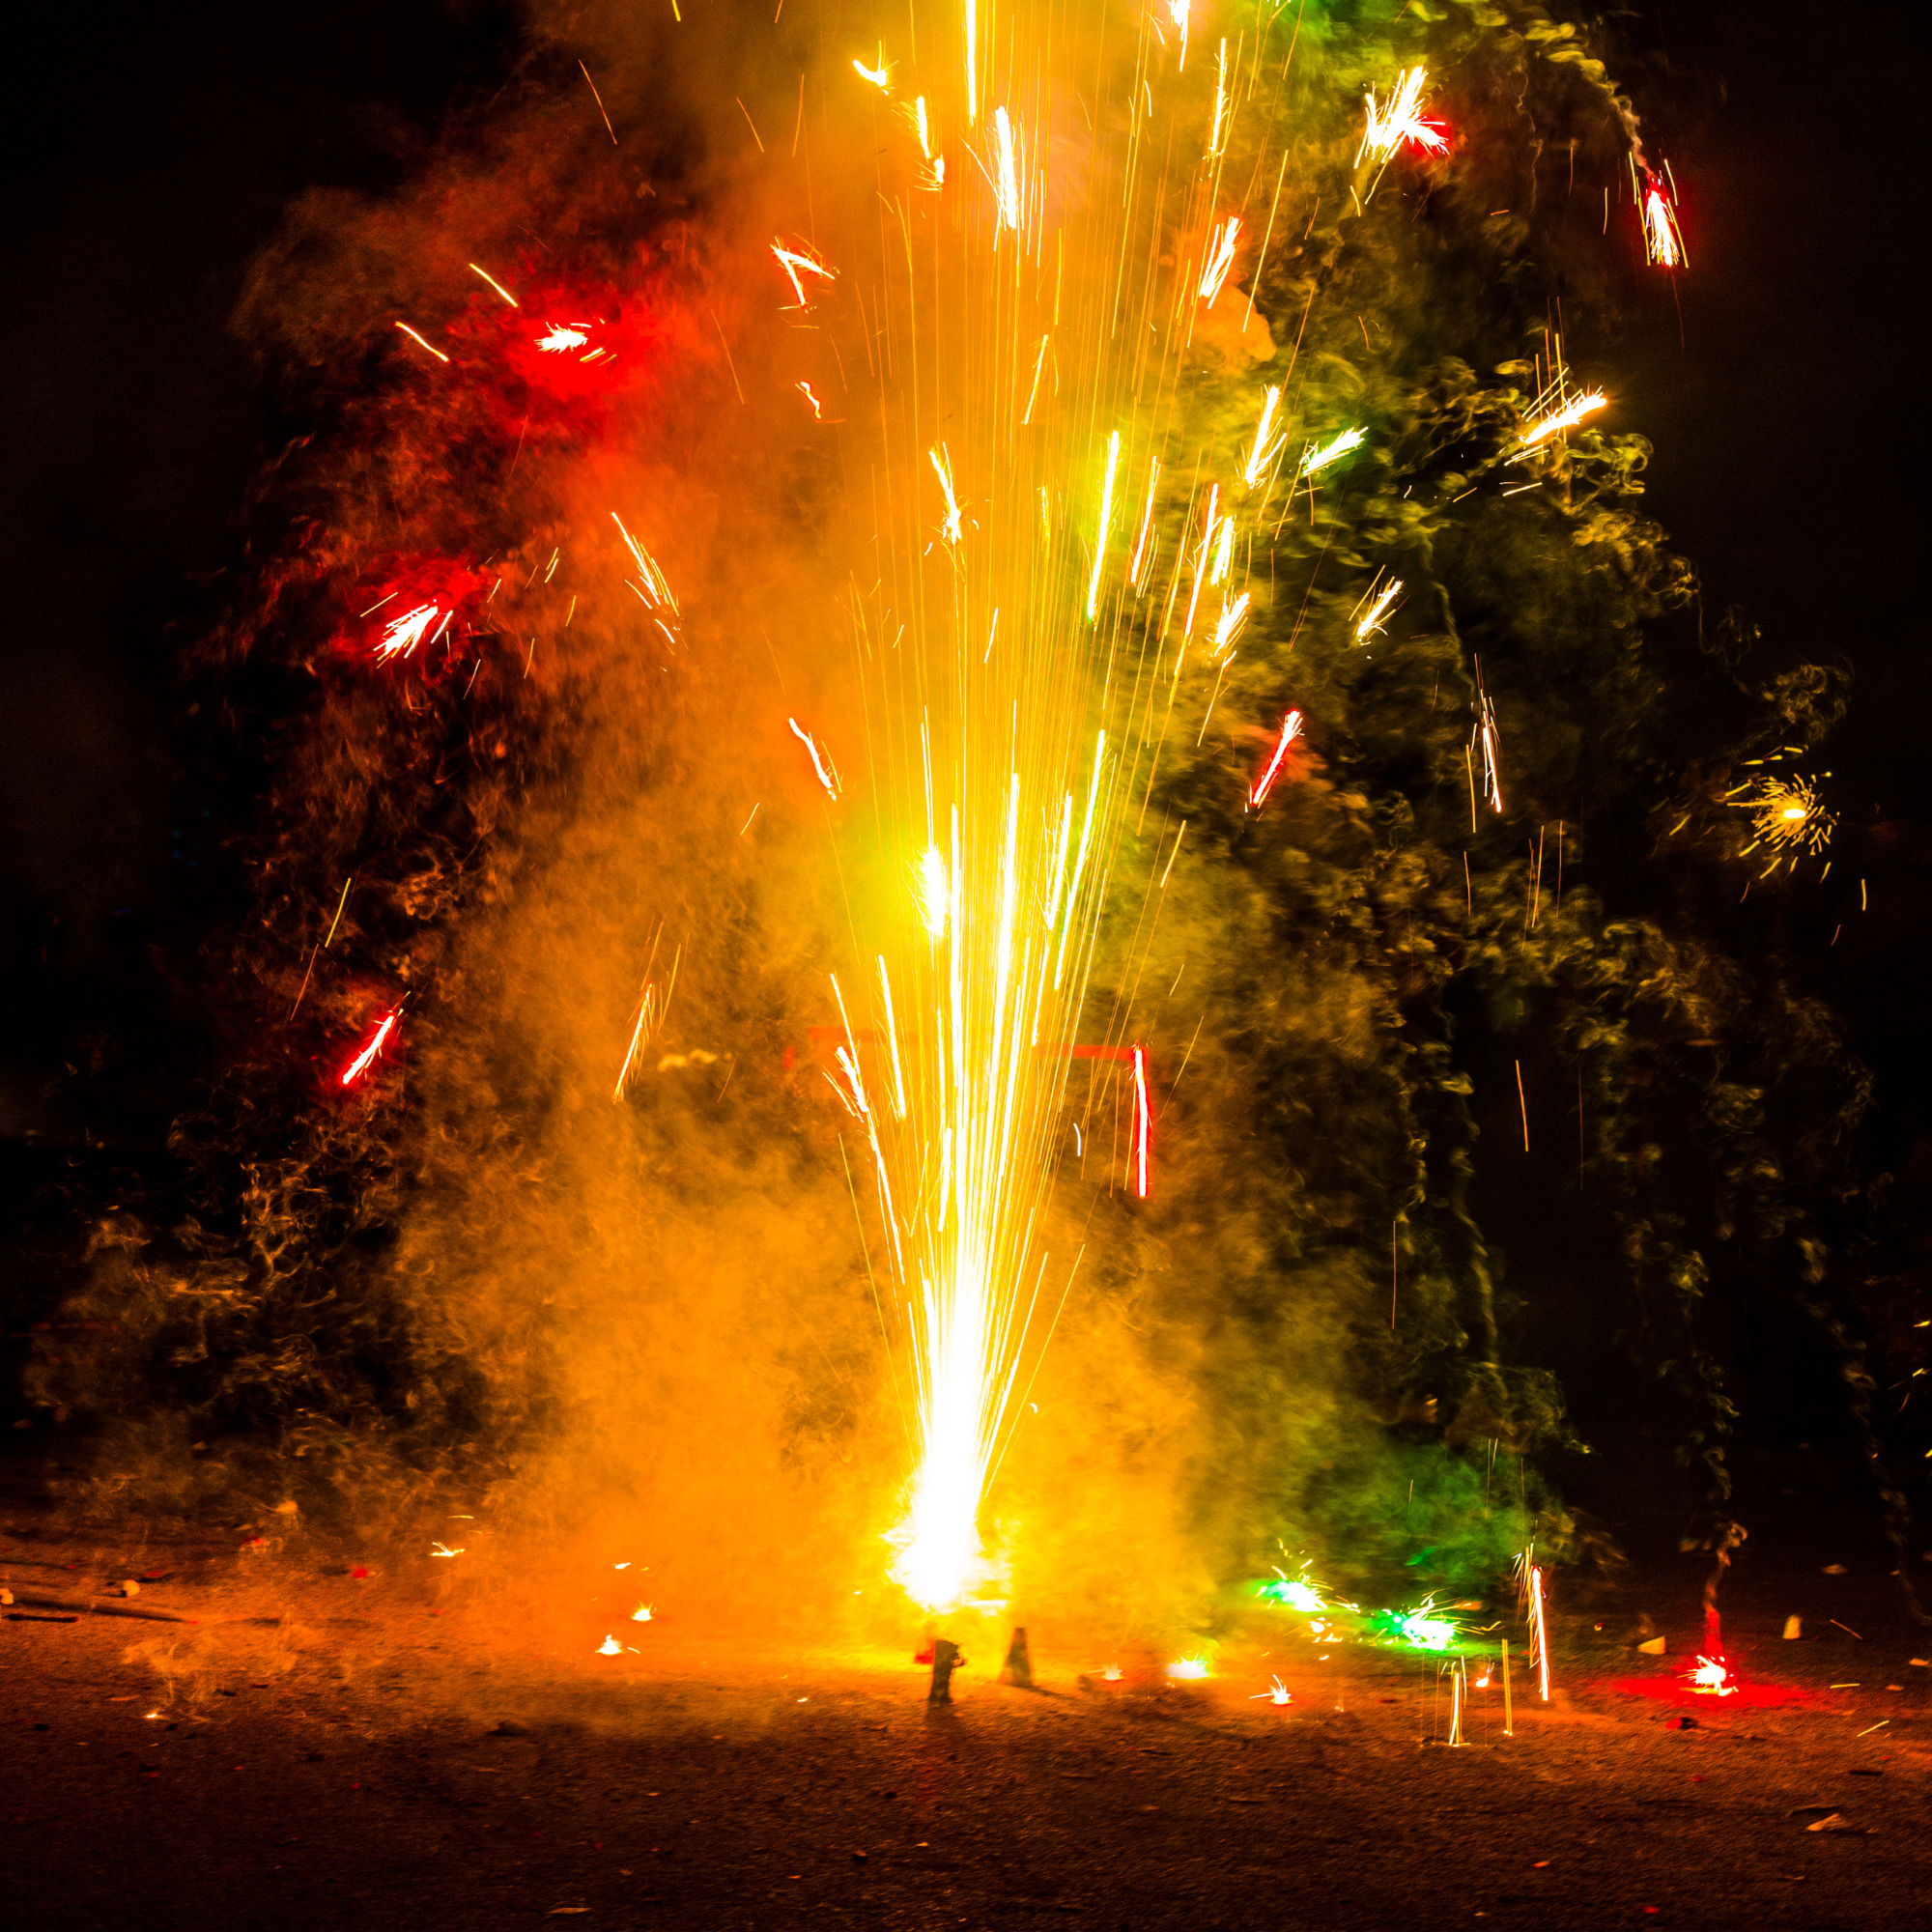 Photo of firecracker erupting in yellow, red, and green sparks.